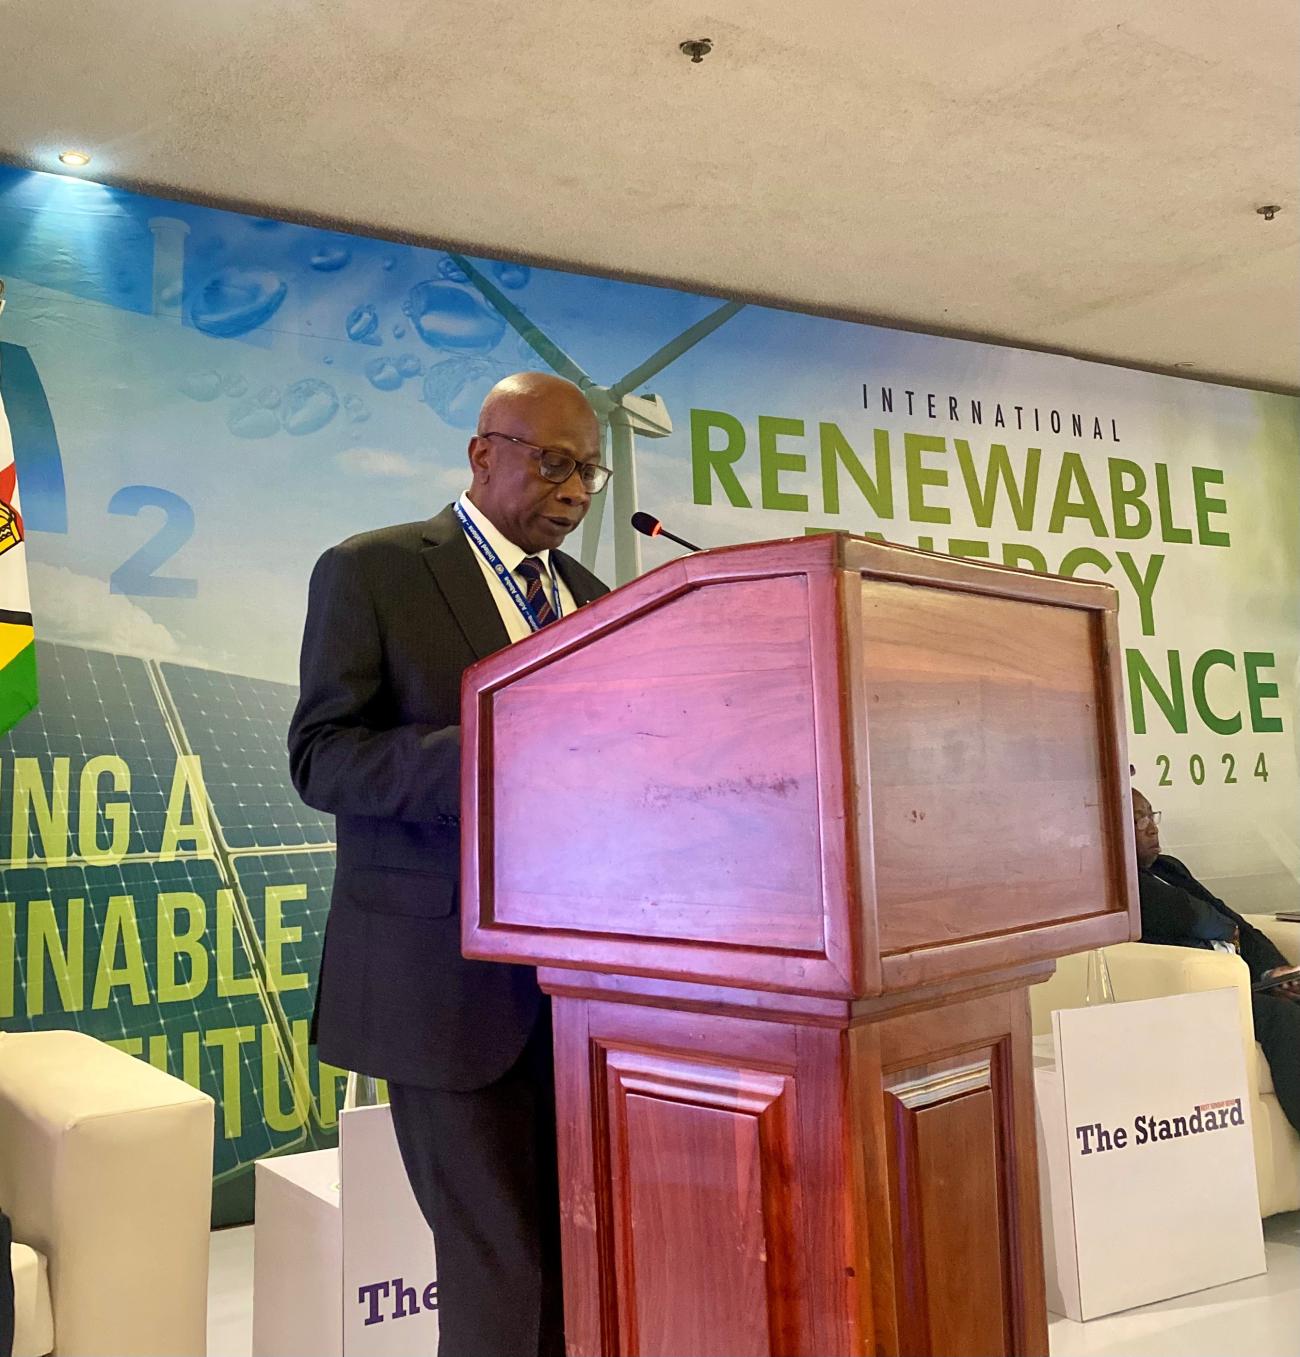 Mr. Kallon highlighted the interconnected nature of the Six Transitions and investment pathways to expedite progress towards achieving the SDGs by 2030.